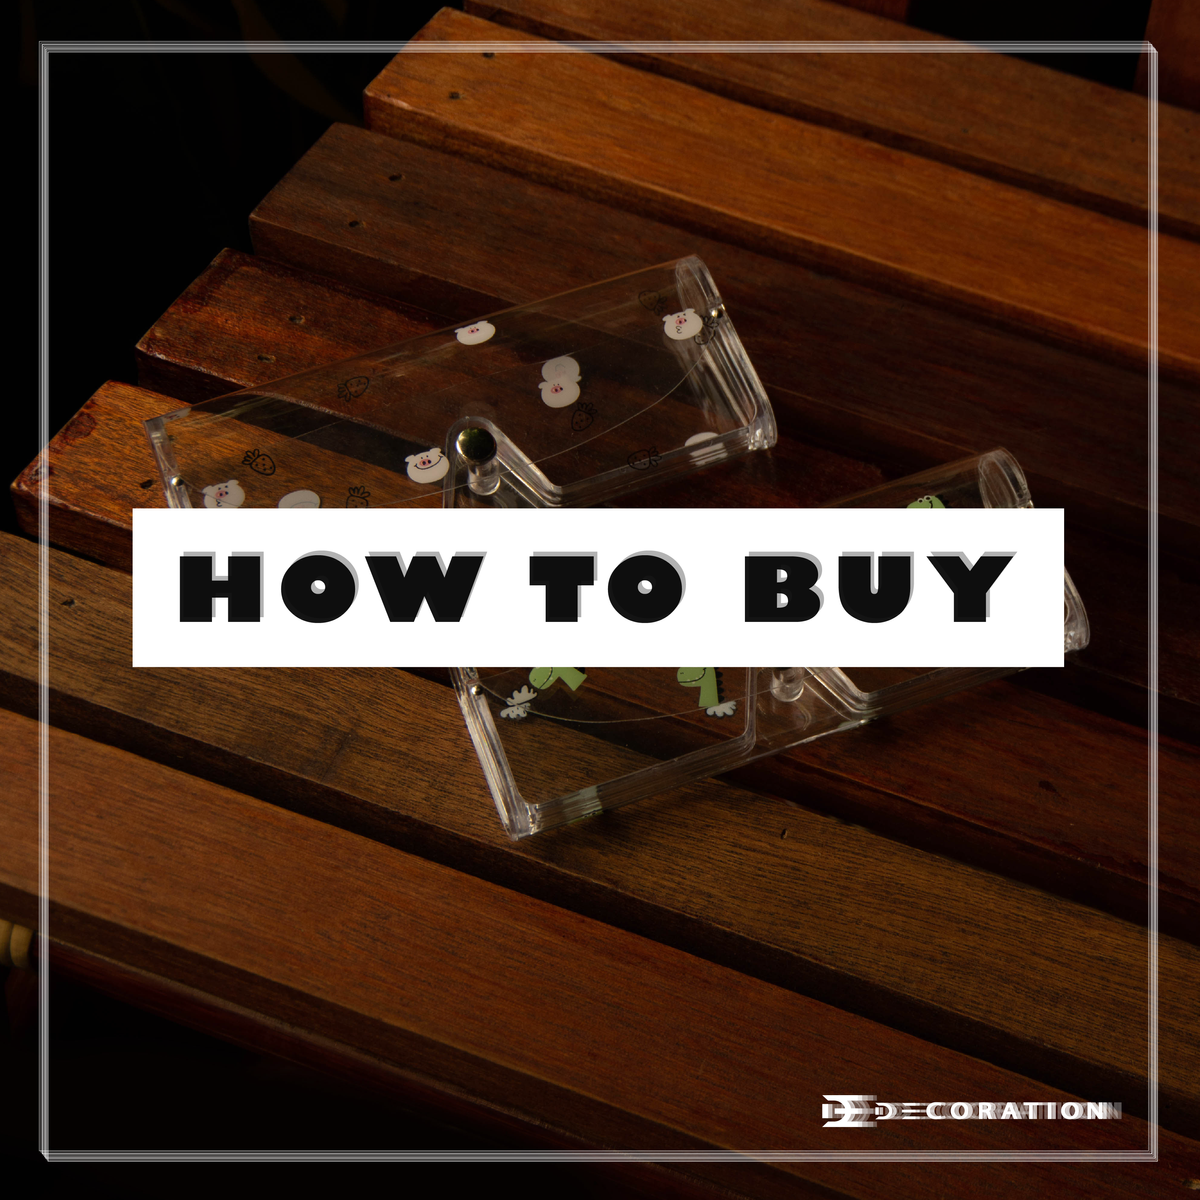 How To Buy